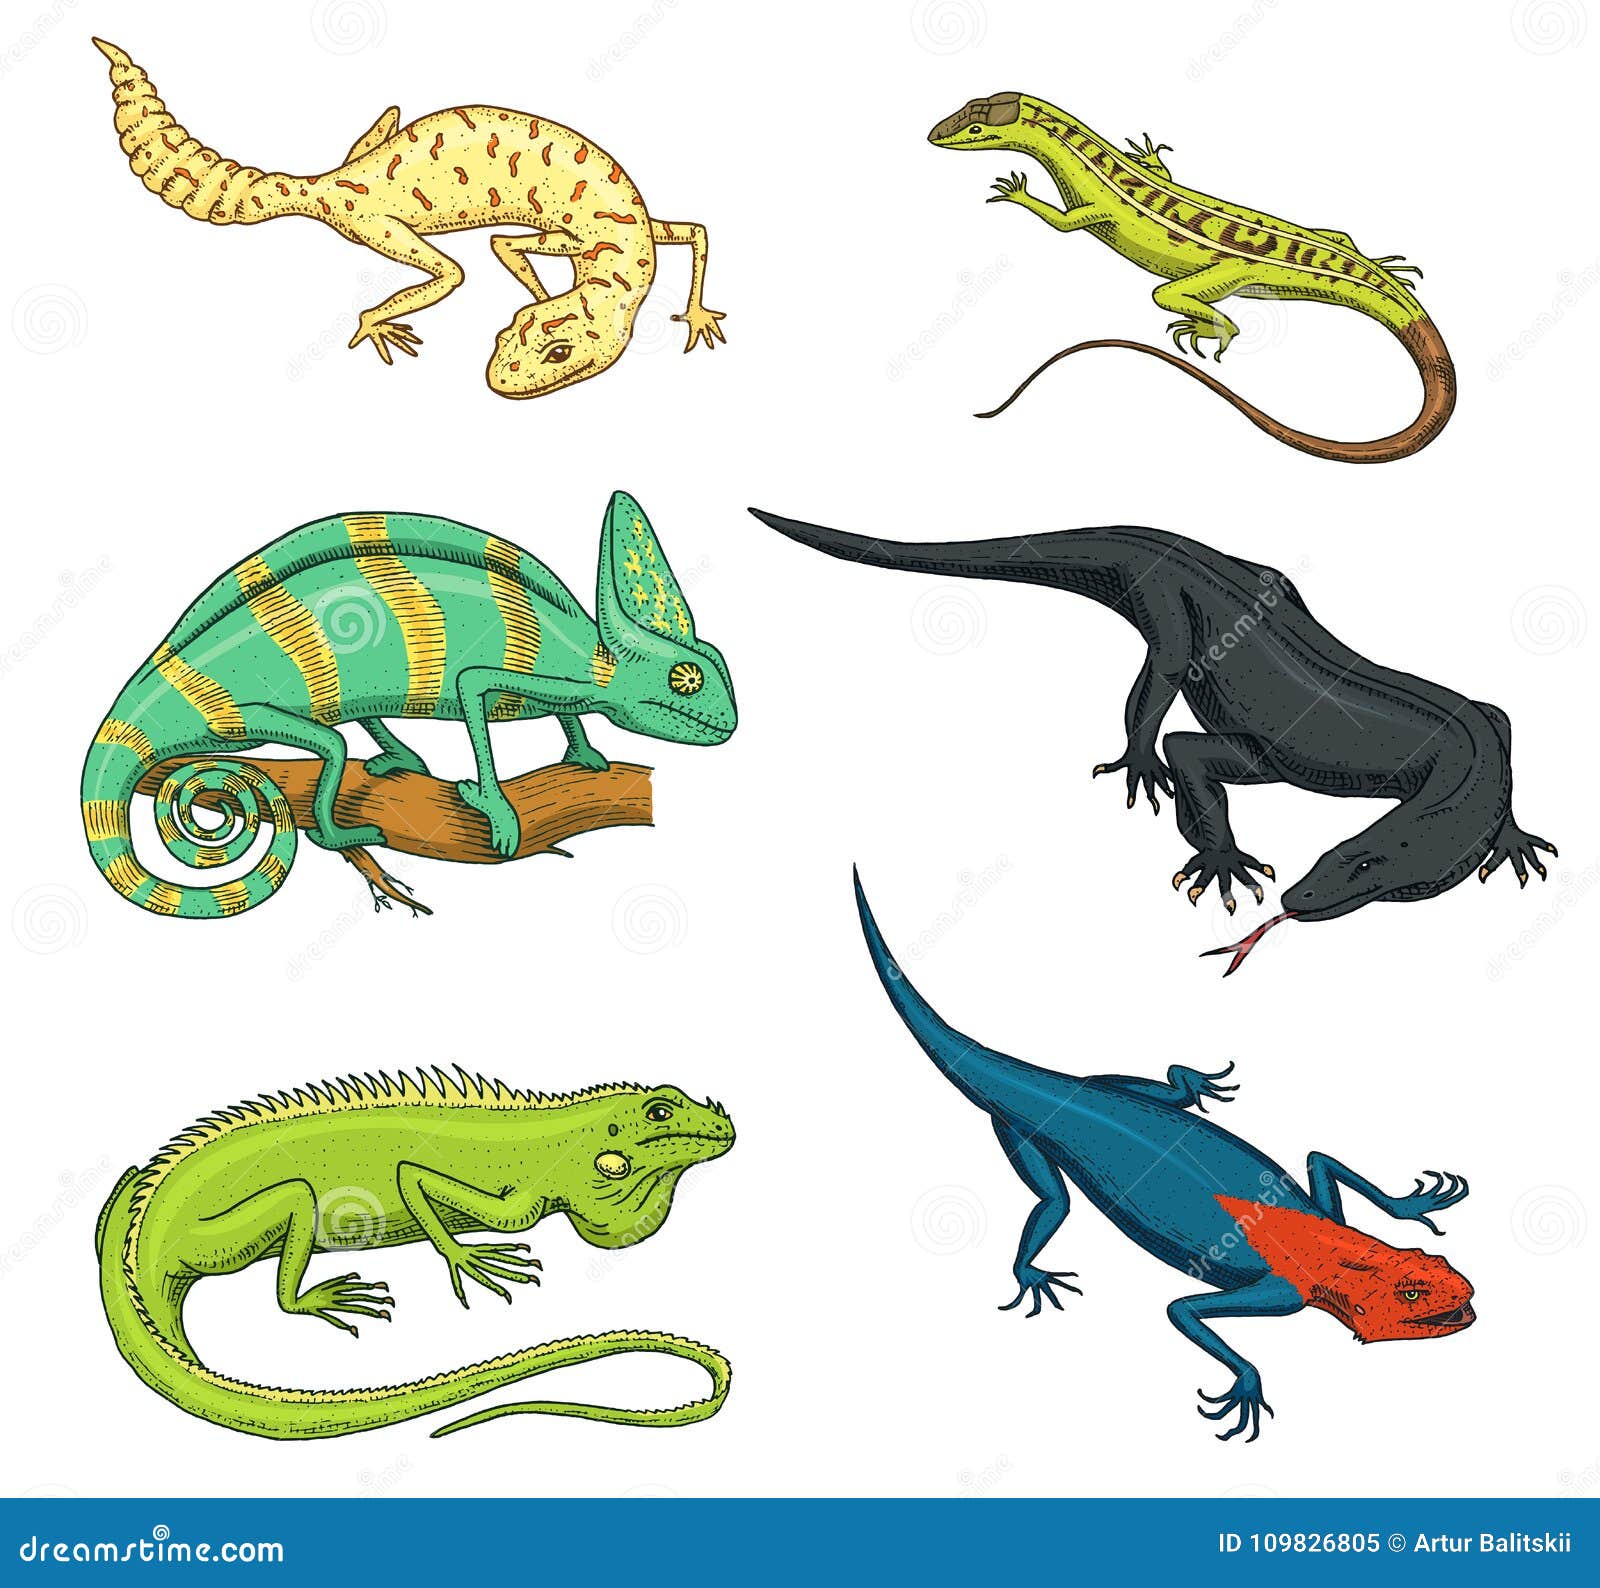 Chameleon Lizard, Green Iguana, Komodo Dragon Monitor, American Sand,  Exotic Reptiles or Snakes, Spotted Fat-tailed Stock Vector - Illustration  of black, iguana: 109826805